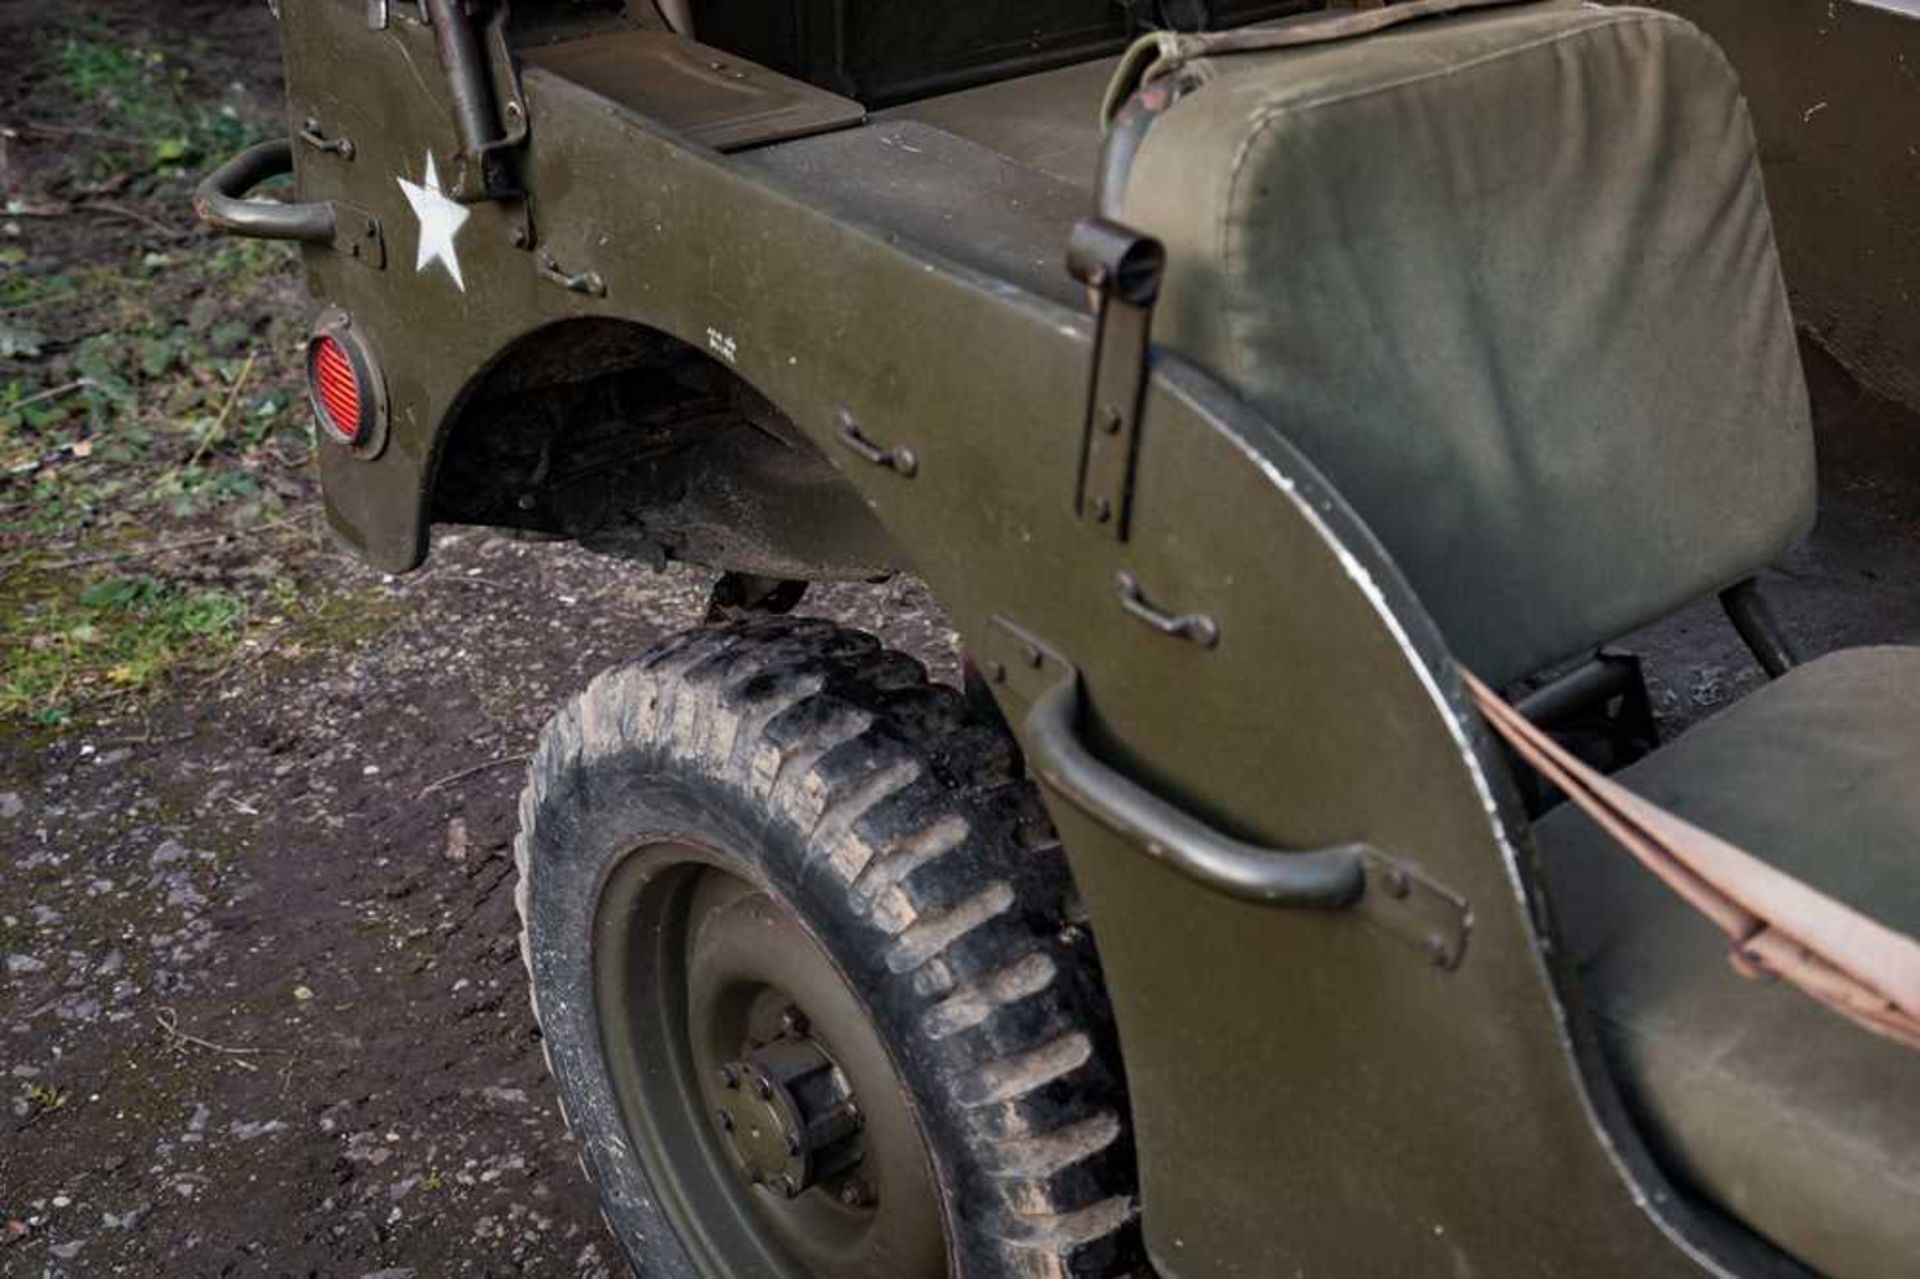 1943 Ford GPW Jeep Formerly the Property of Oscar Winner Rex Harrison - Image 19 of 88